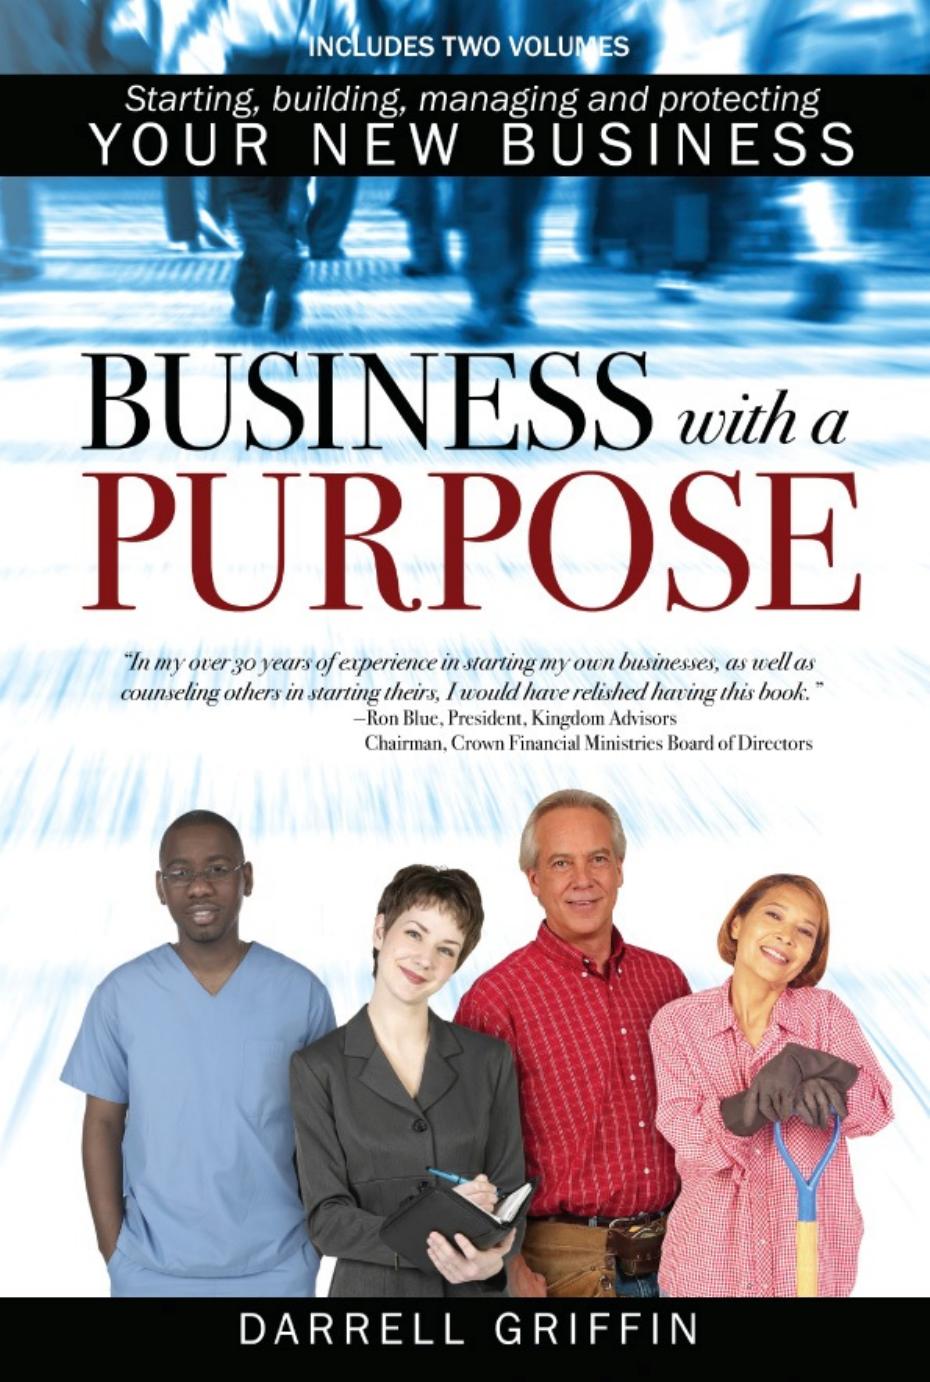 Business with a Purpose - Guide to Starting Your Own Business